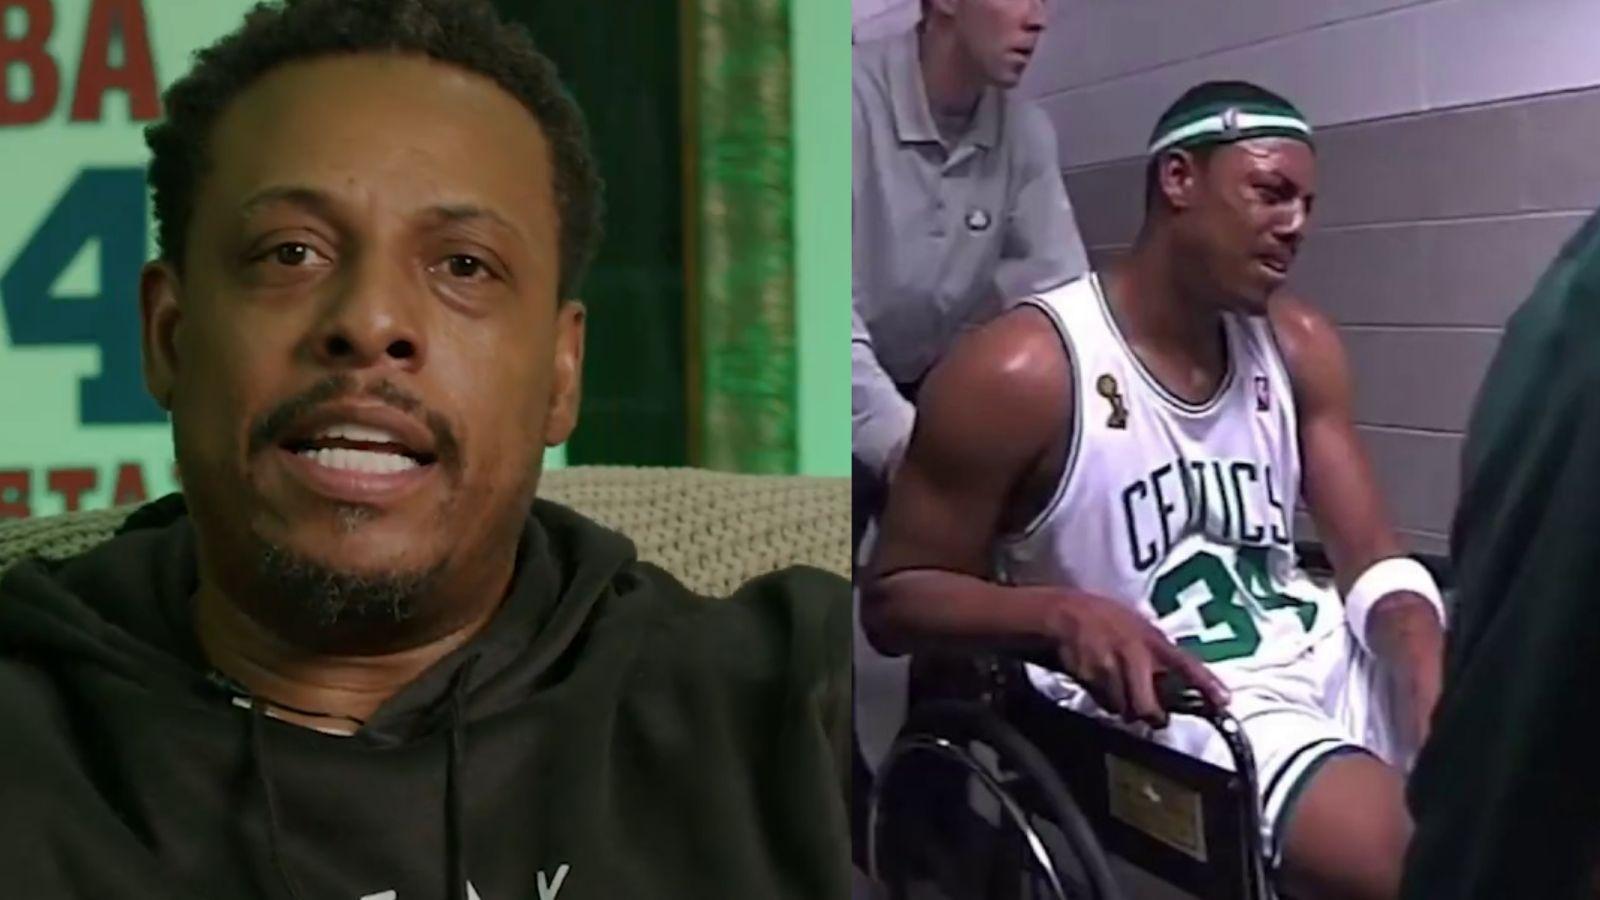 Paul Pierce on the set of "All the Smoke" (left) and in the tunnel during Game 1 of the 2008 NBA Finals (right).